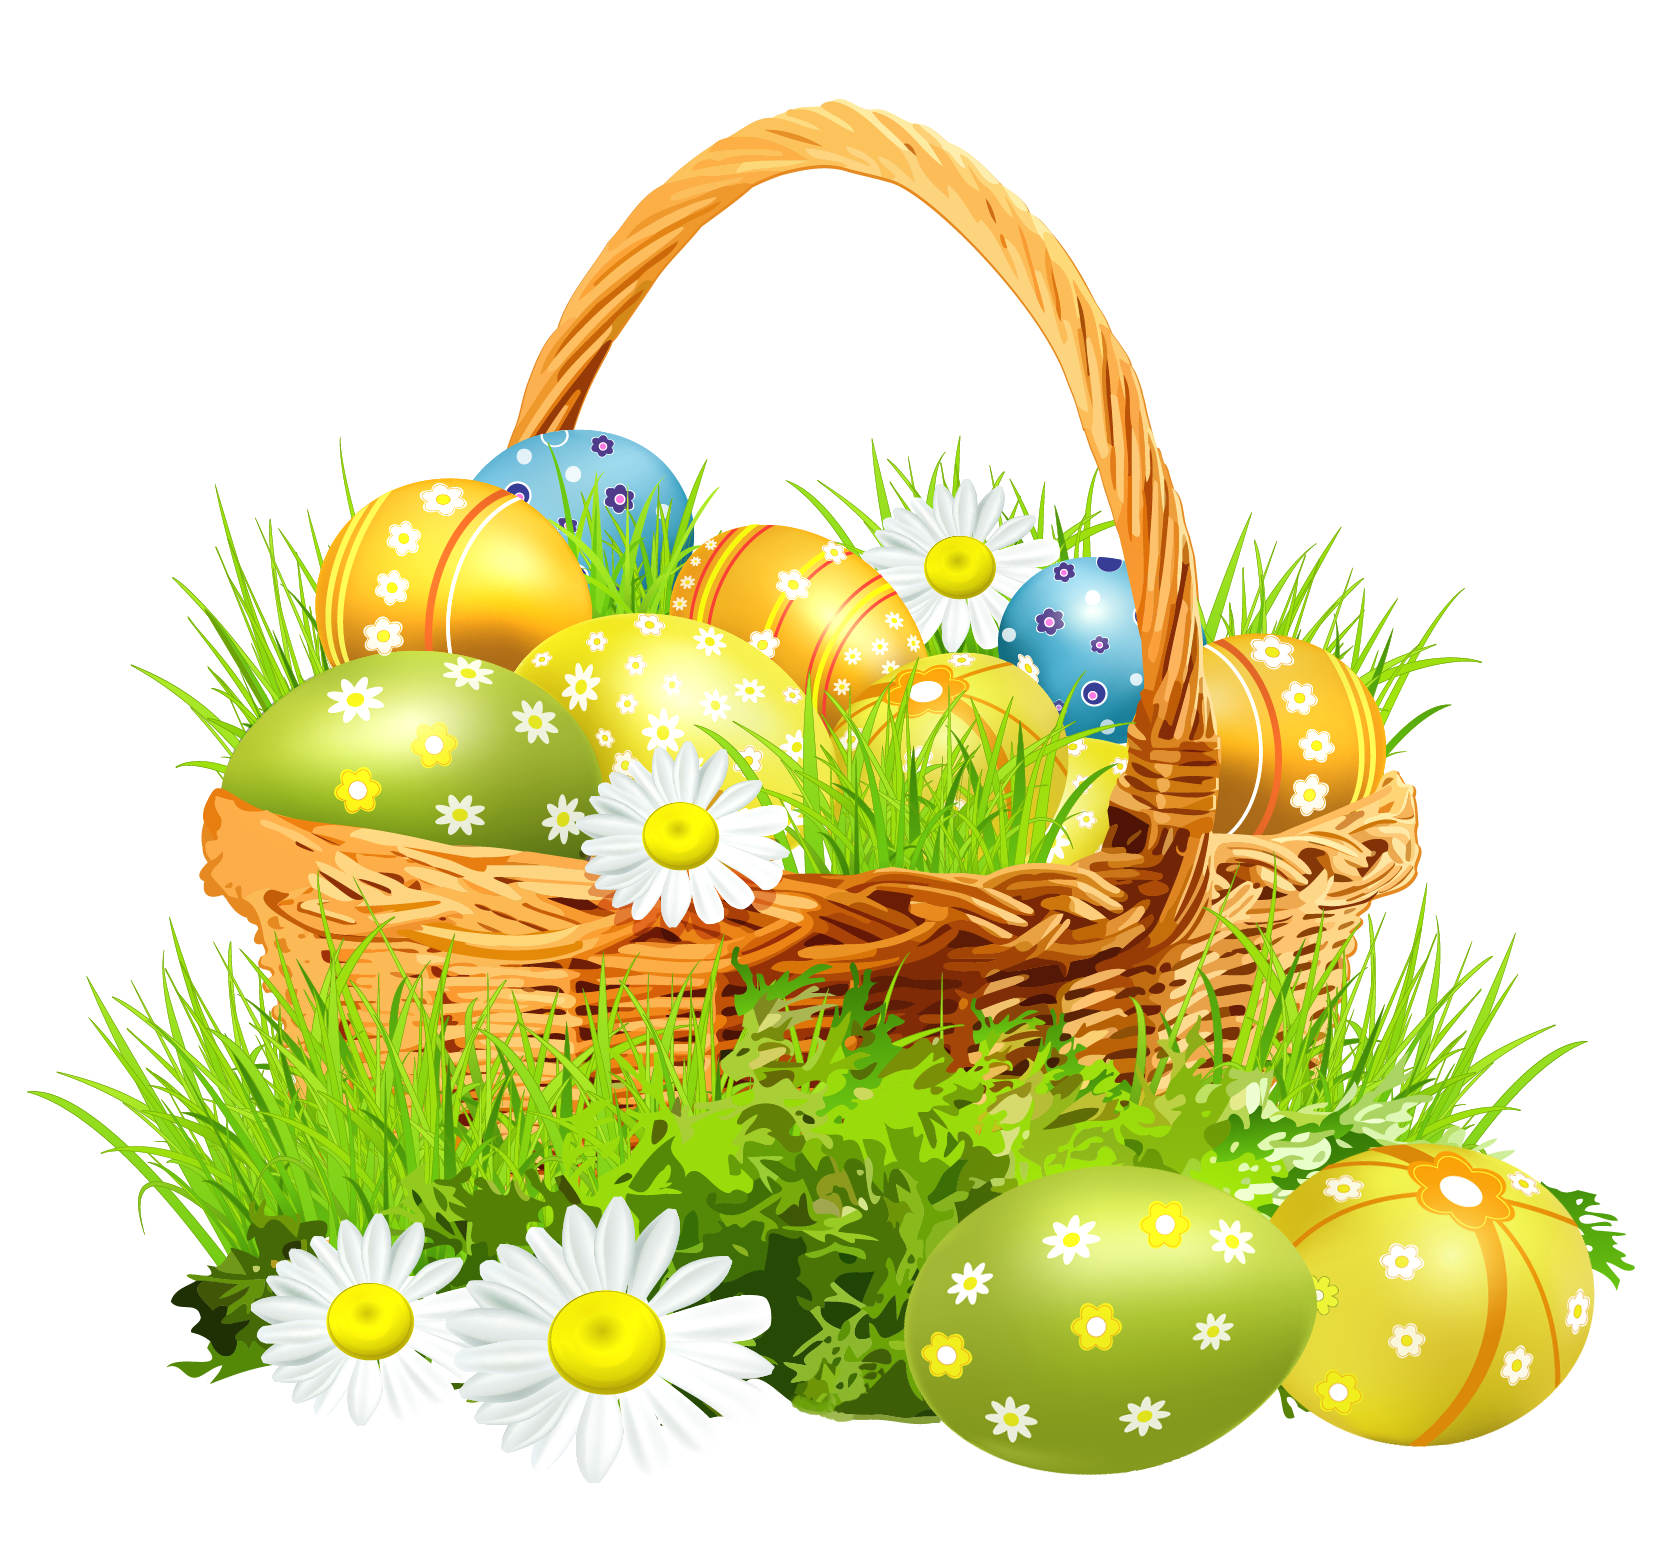 Basket with eggs and. Easter clipart house